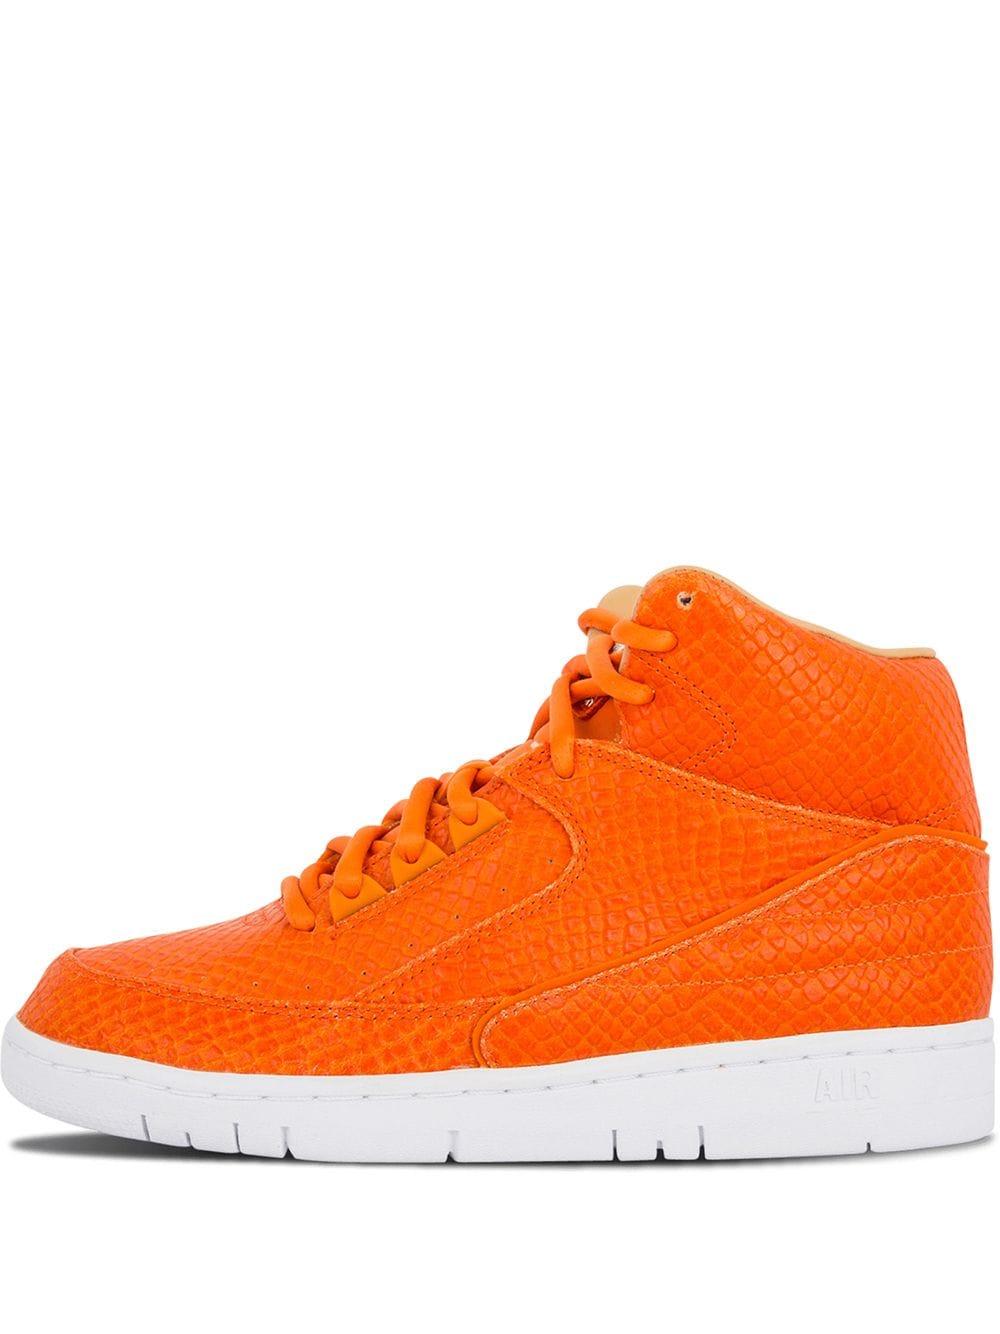 Nike Leather Air Python Lux B Sneakers in Orange for Men - Save 13% | Lyst